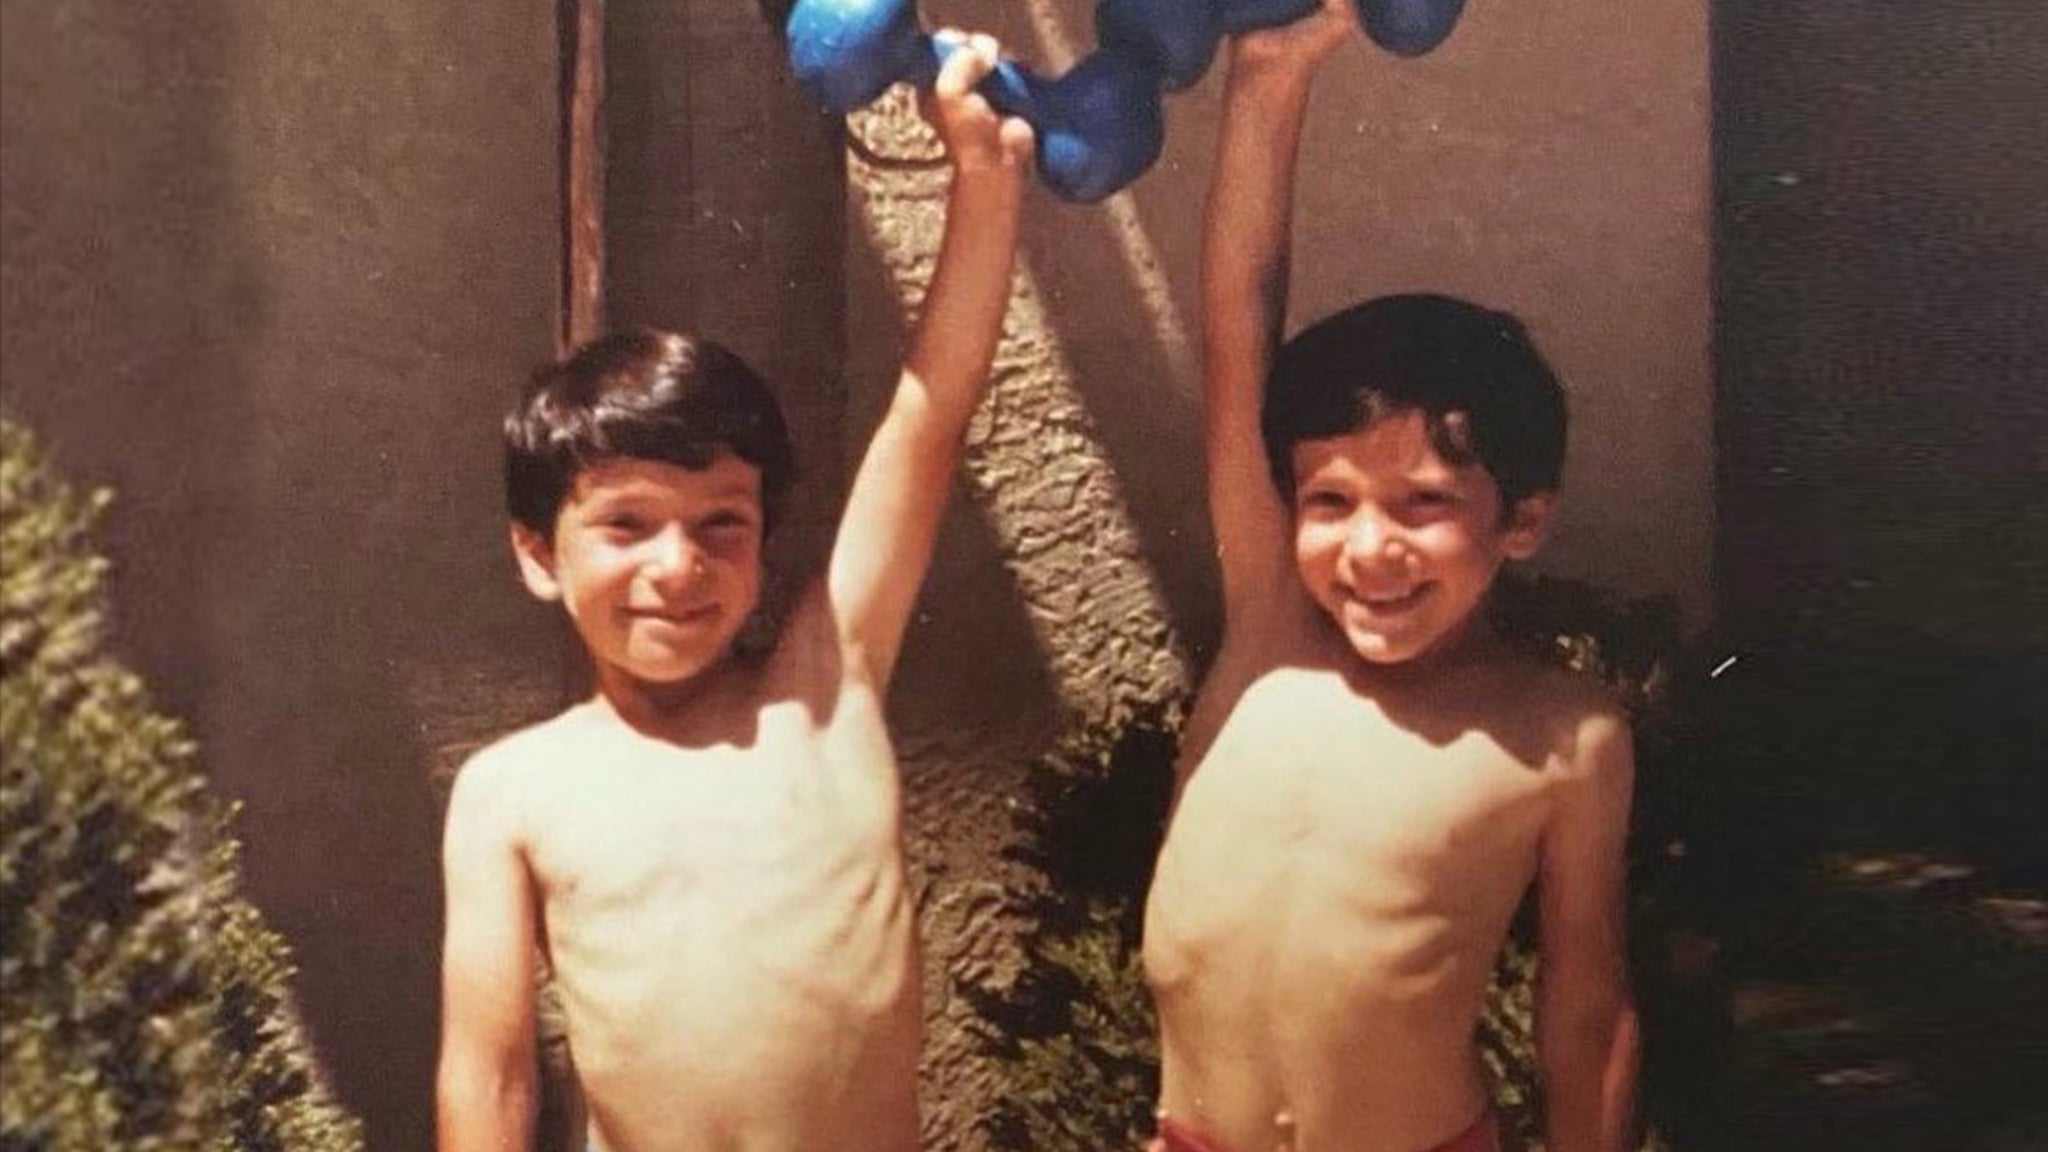 Guess who these twin brothers turned out to be!